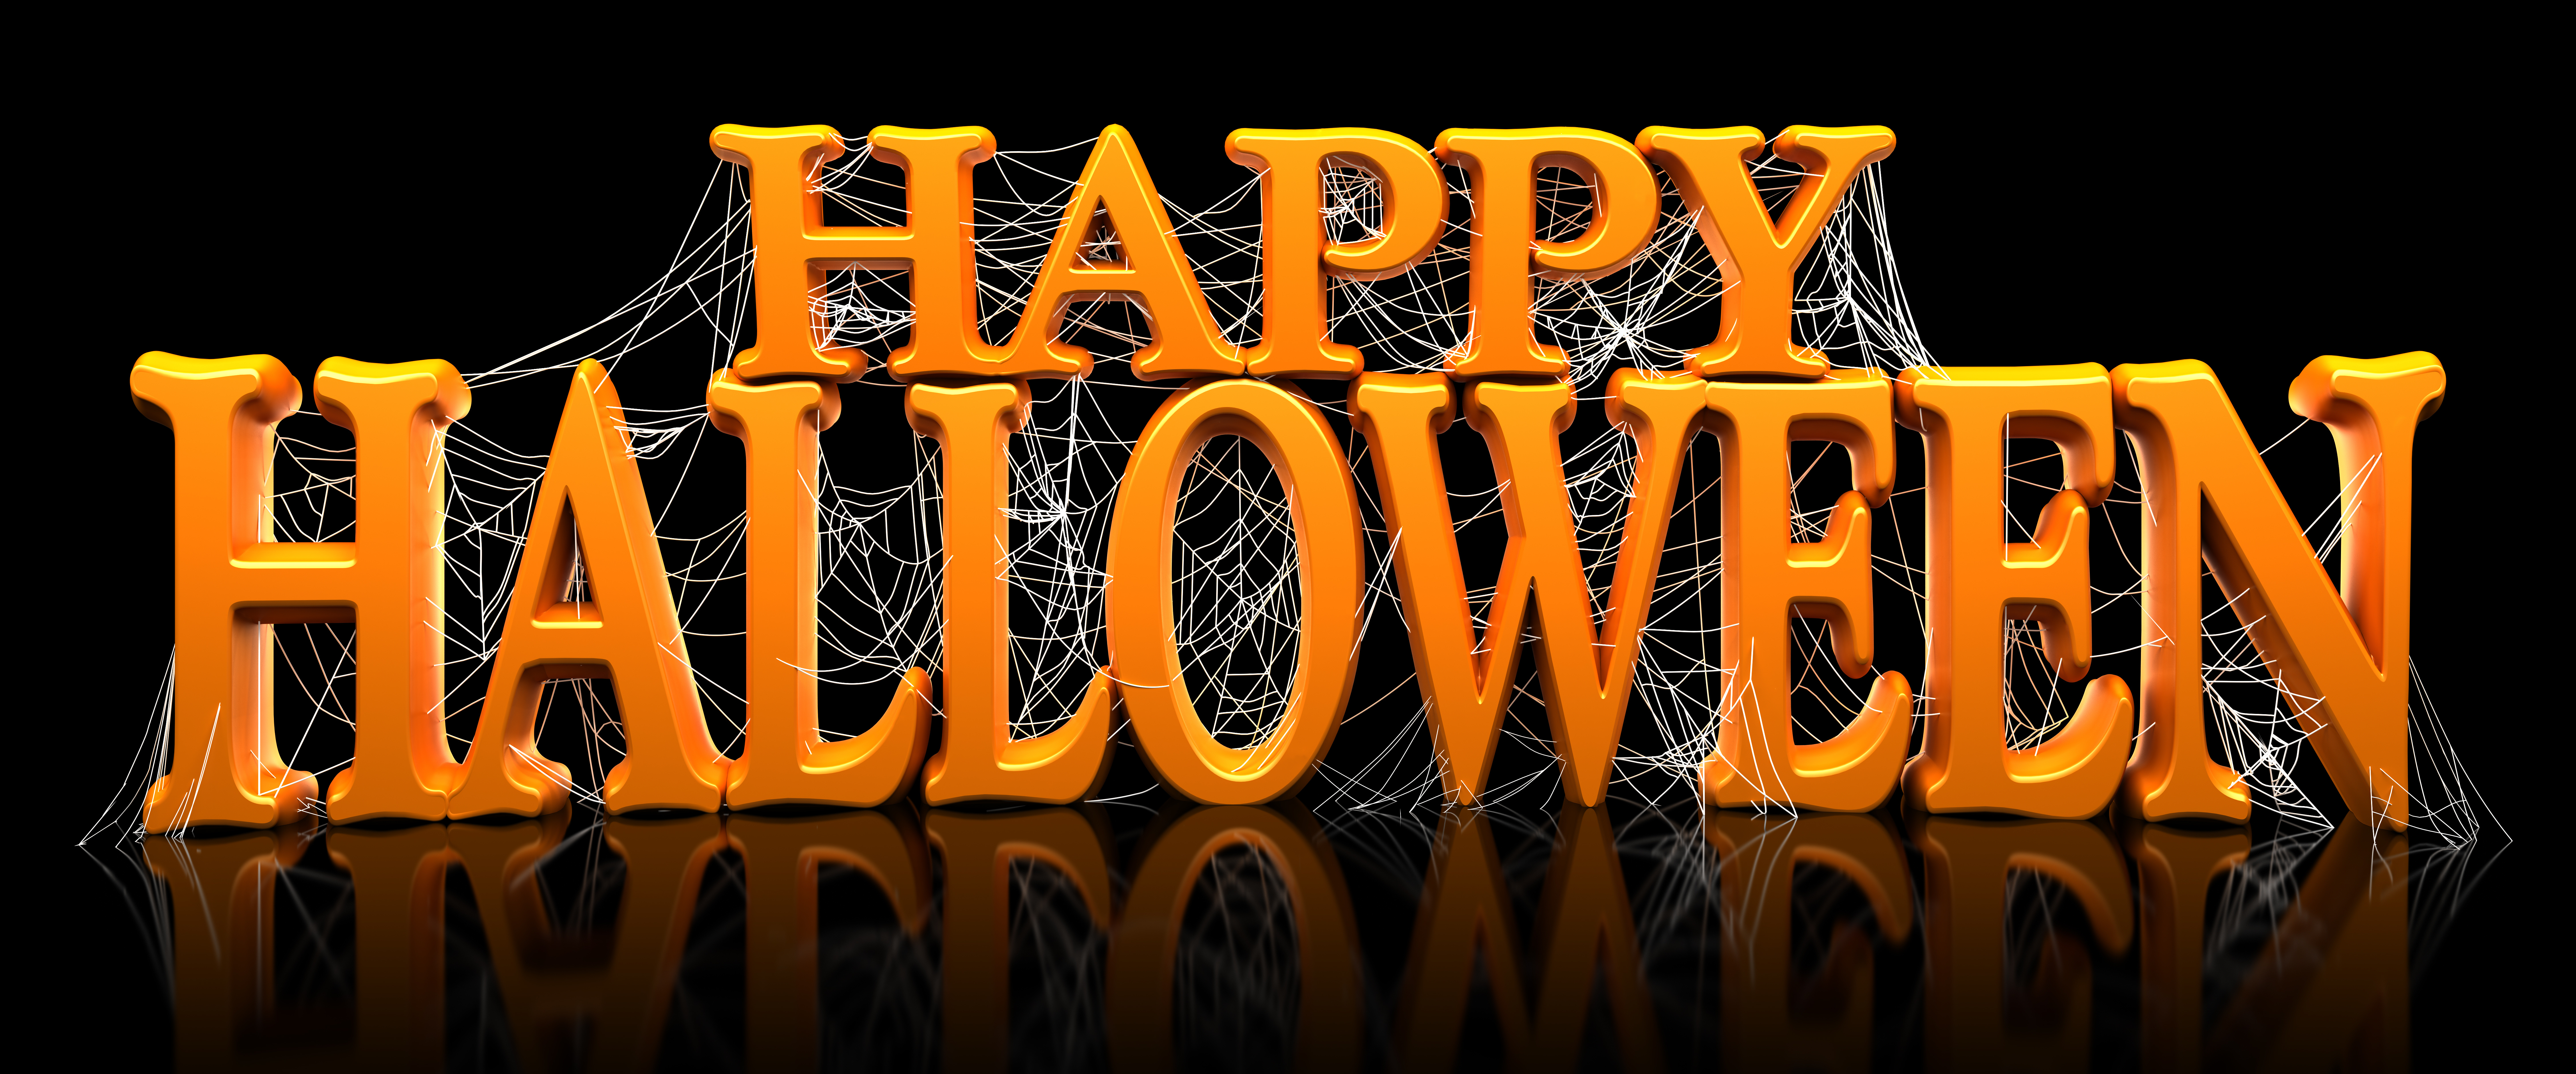 Download mobile wallpaper Halloween, Holiday, Happy Halloween for free.